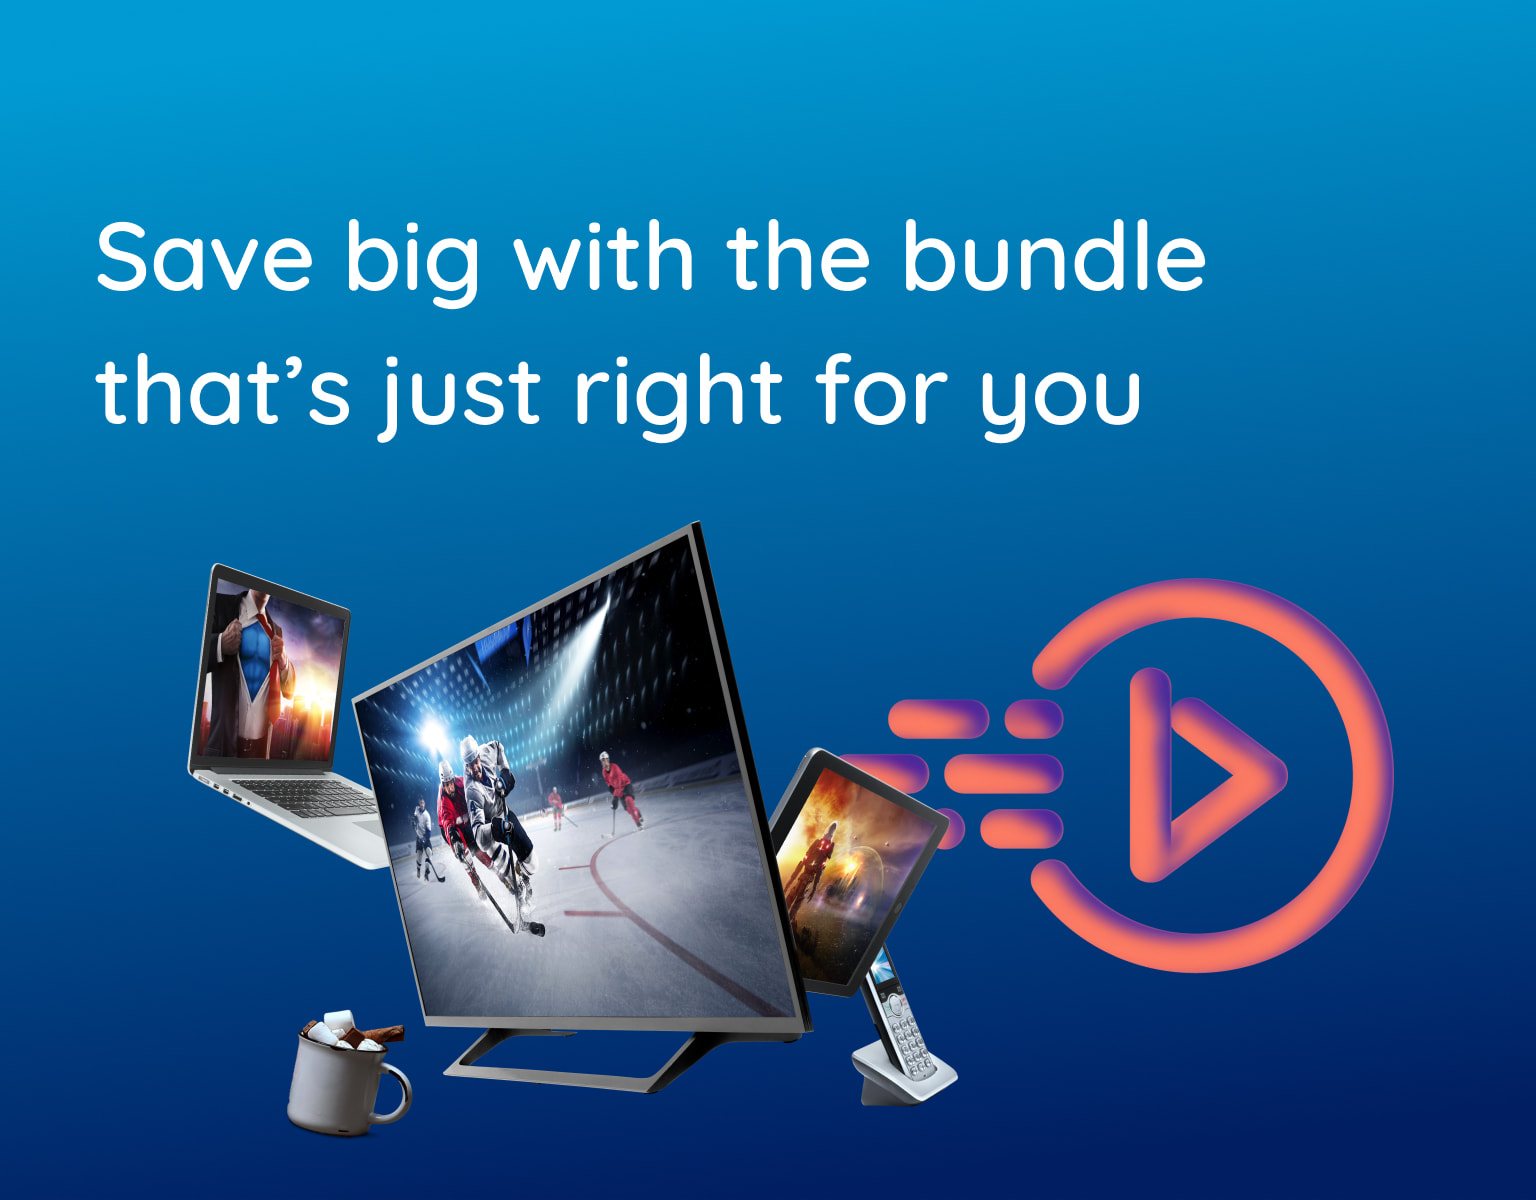 Save big with the bundle that’s just right for you.